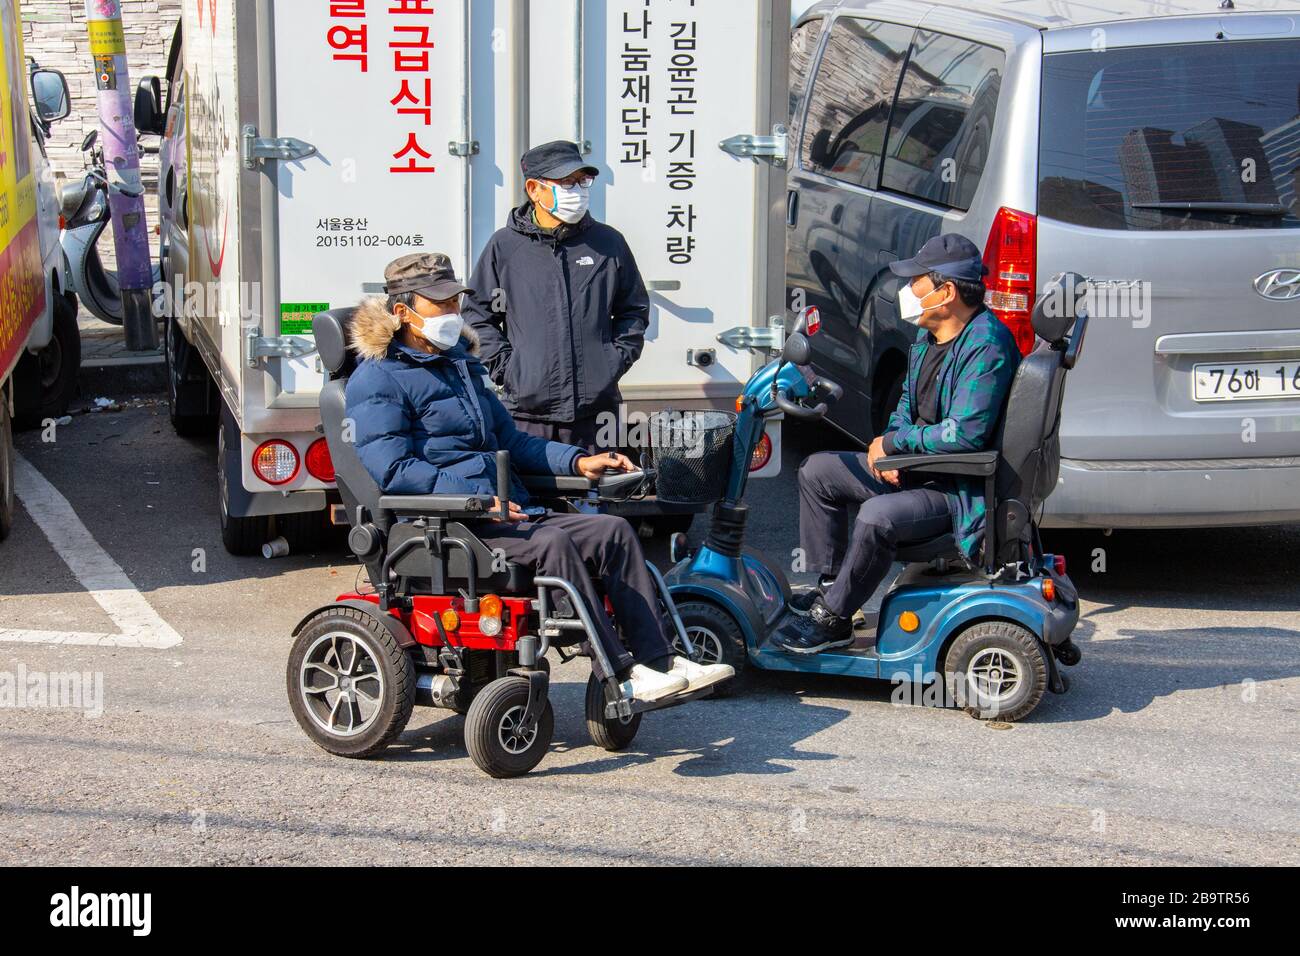 Men on mobility scooters wearing a masks during the Coronavirus pandemic, Seoul, South Korea Stock Photo